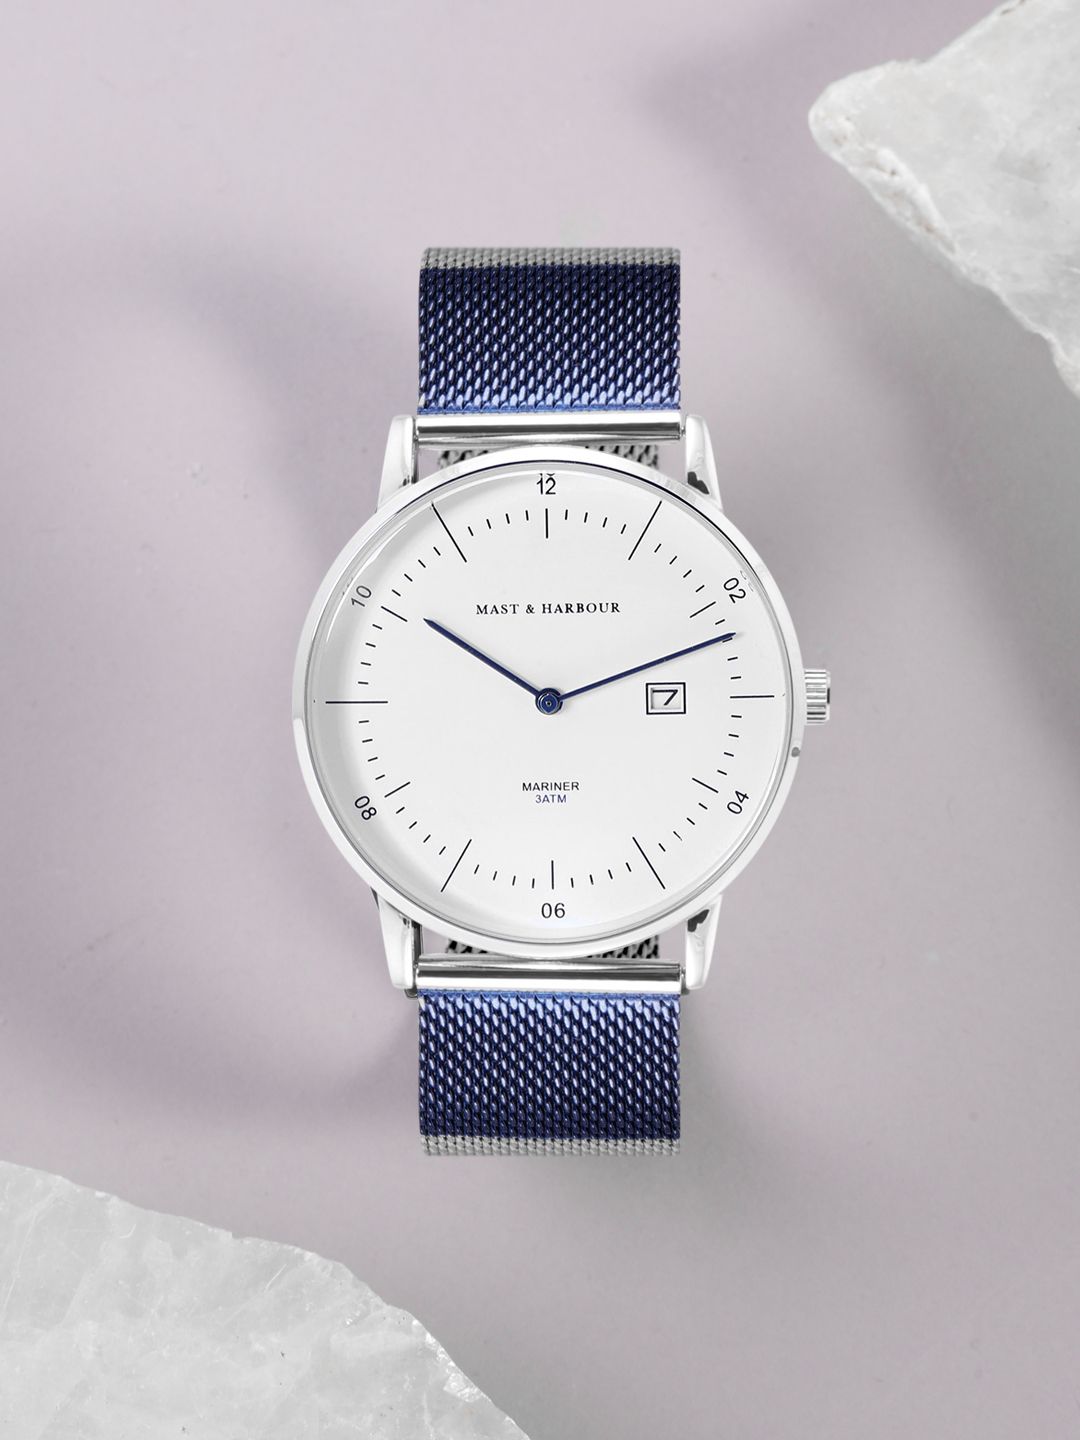 Mast & Harbour Unisex White Dial & Silver-Toned Straps Analogue Watch MFB-PN-PF-DK2751 Price in India